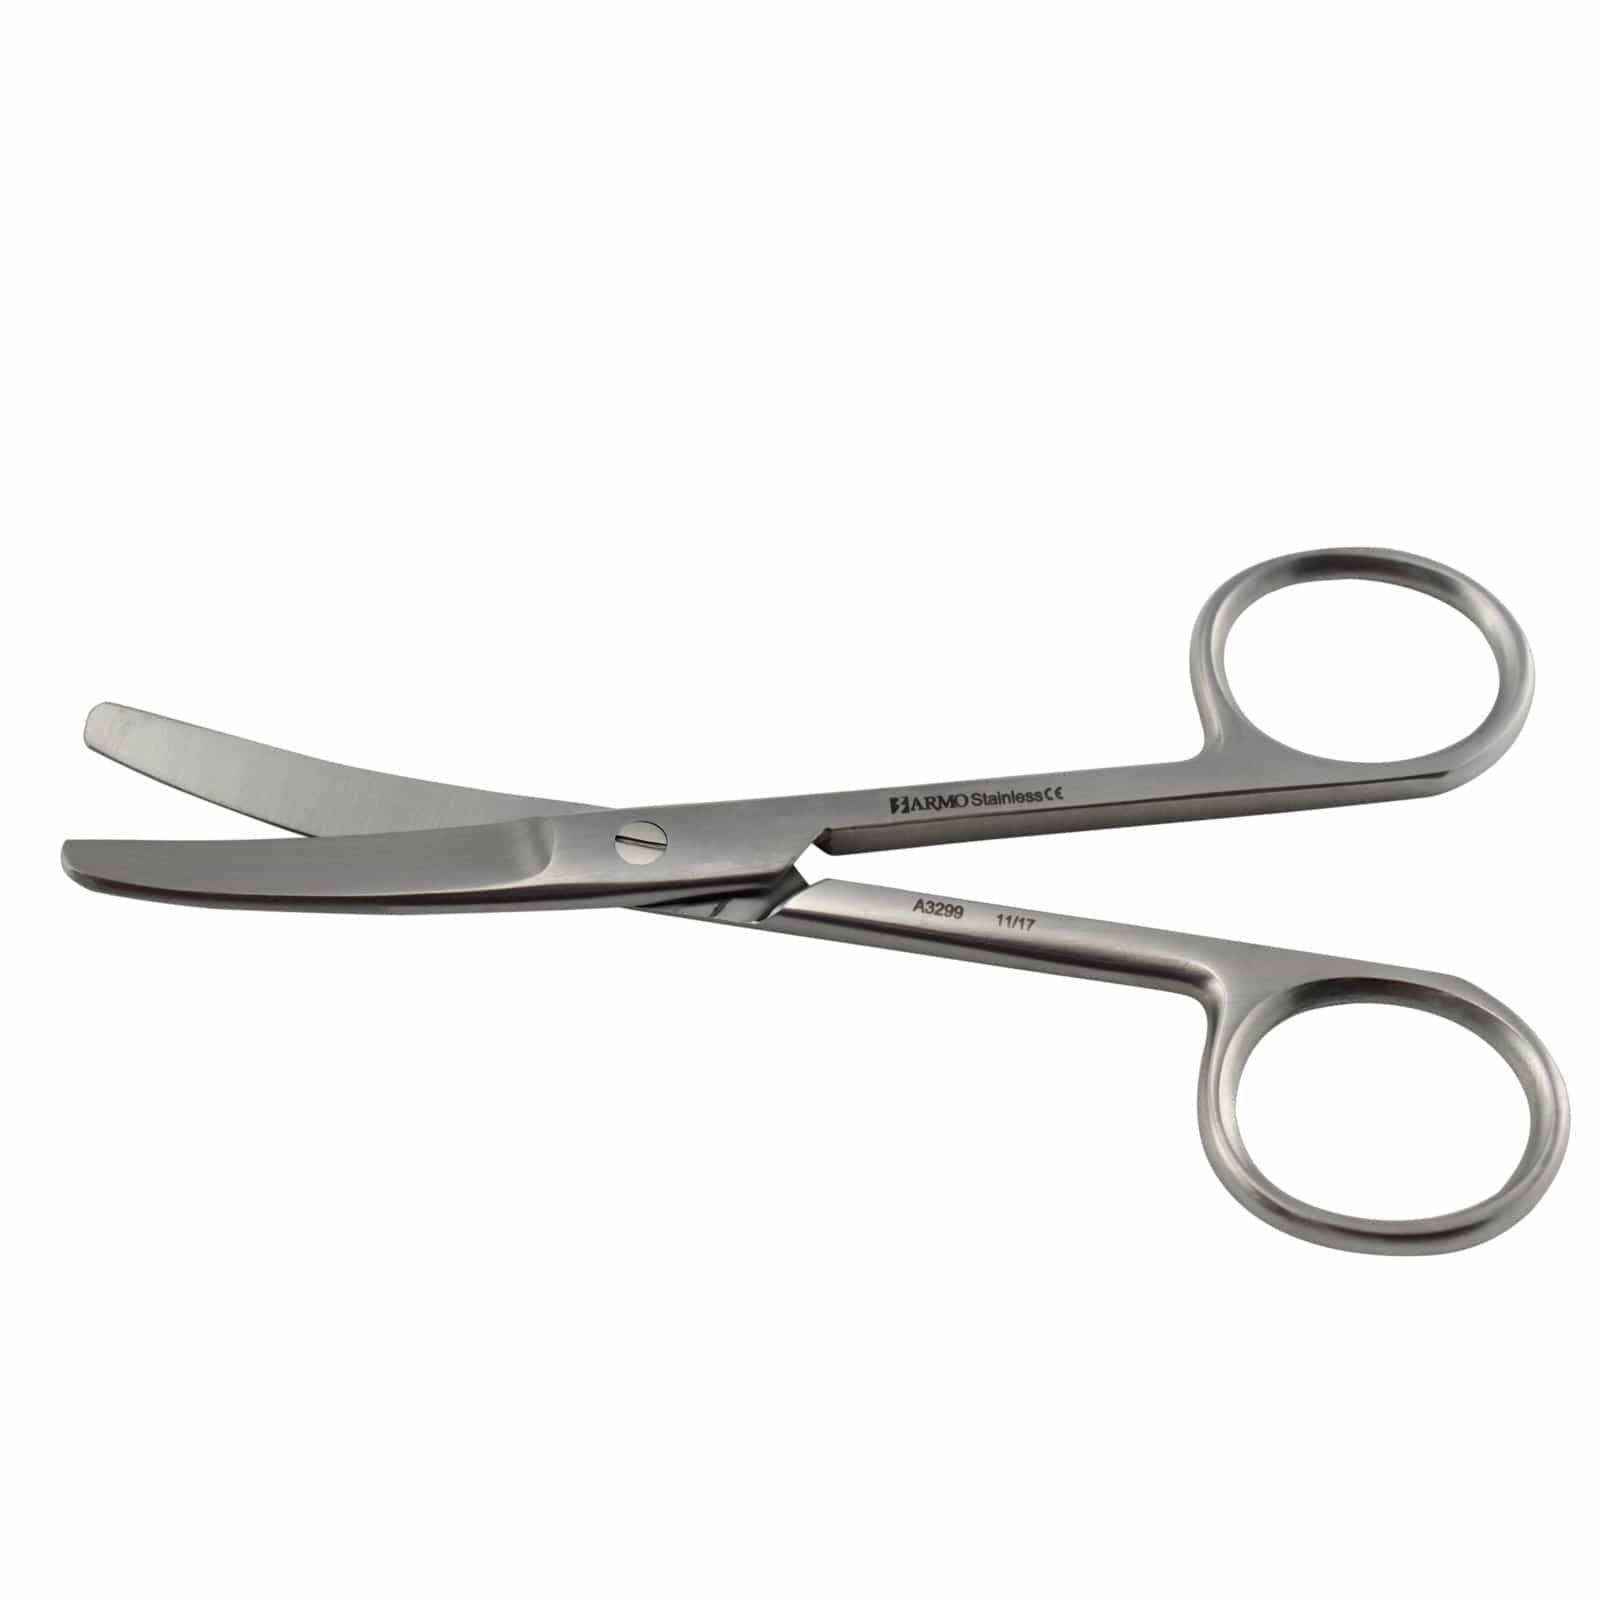 Armo Surgical Instruments 11cm / Curved / Blunt/Blunt Armo Surgical Scissors